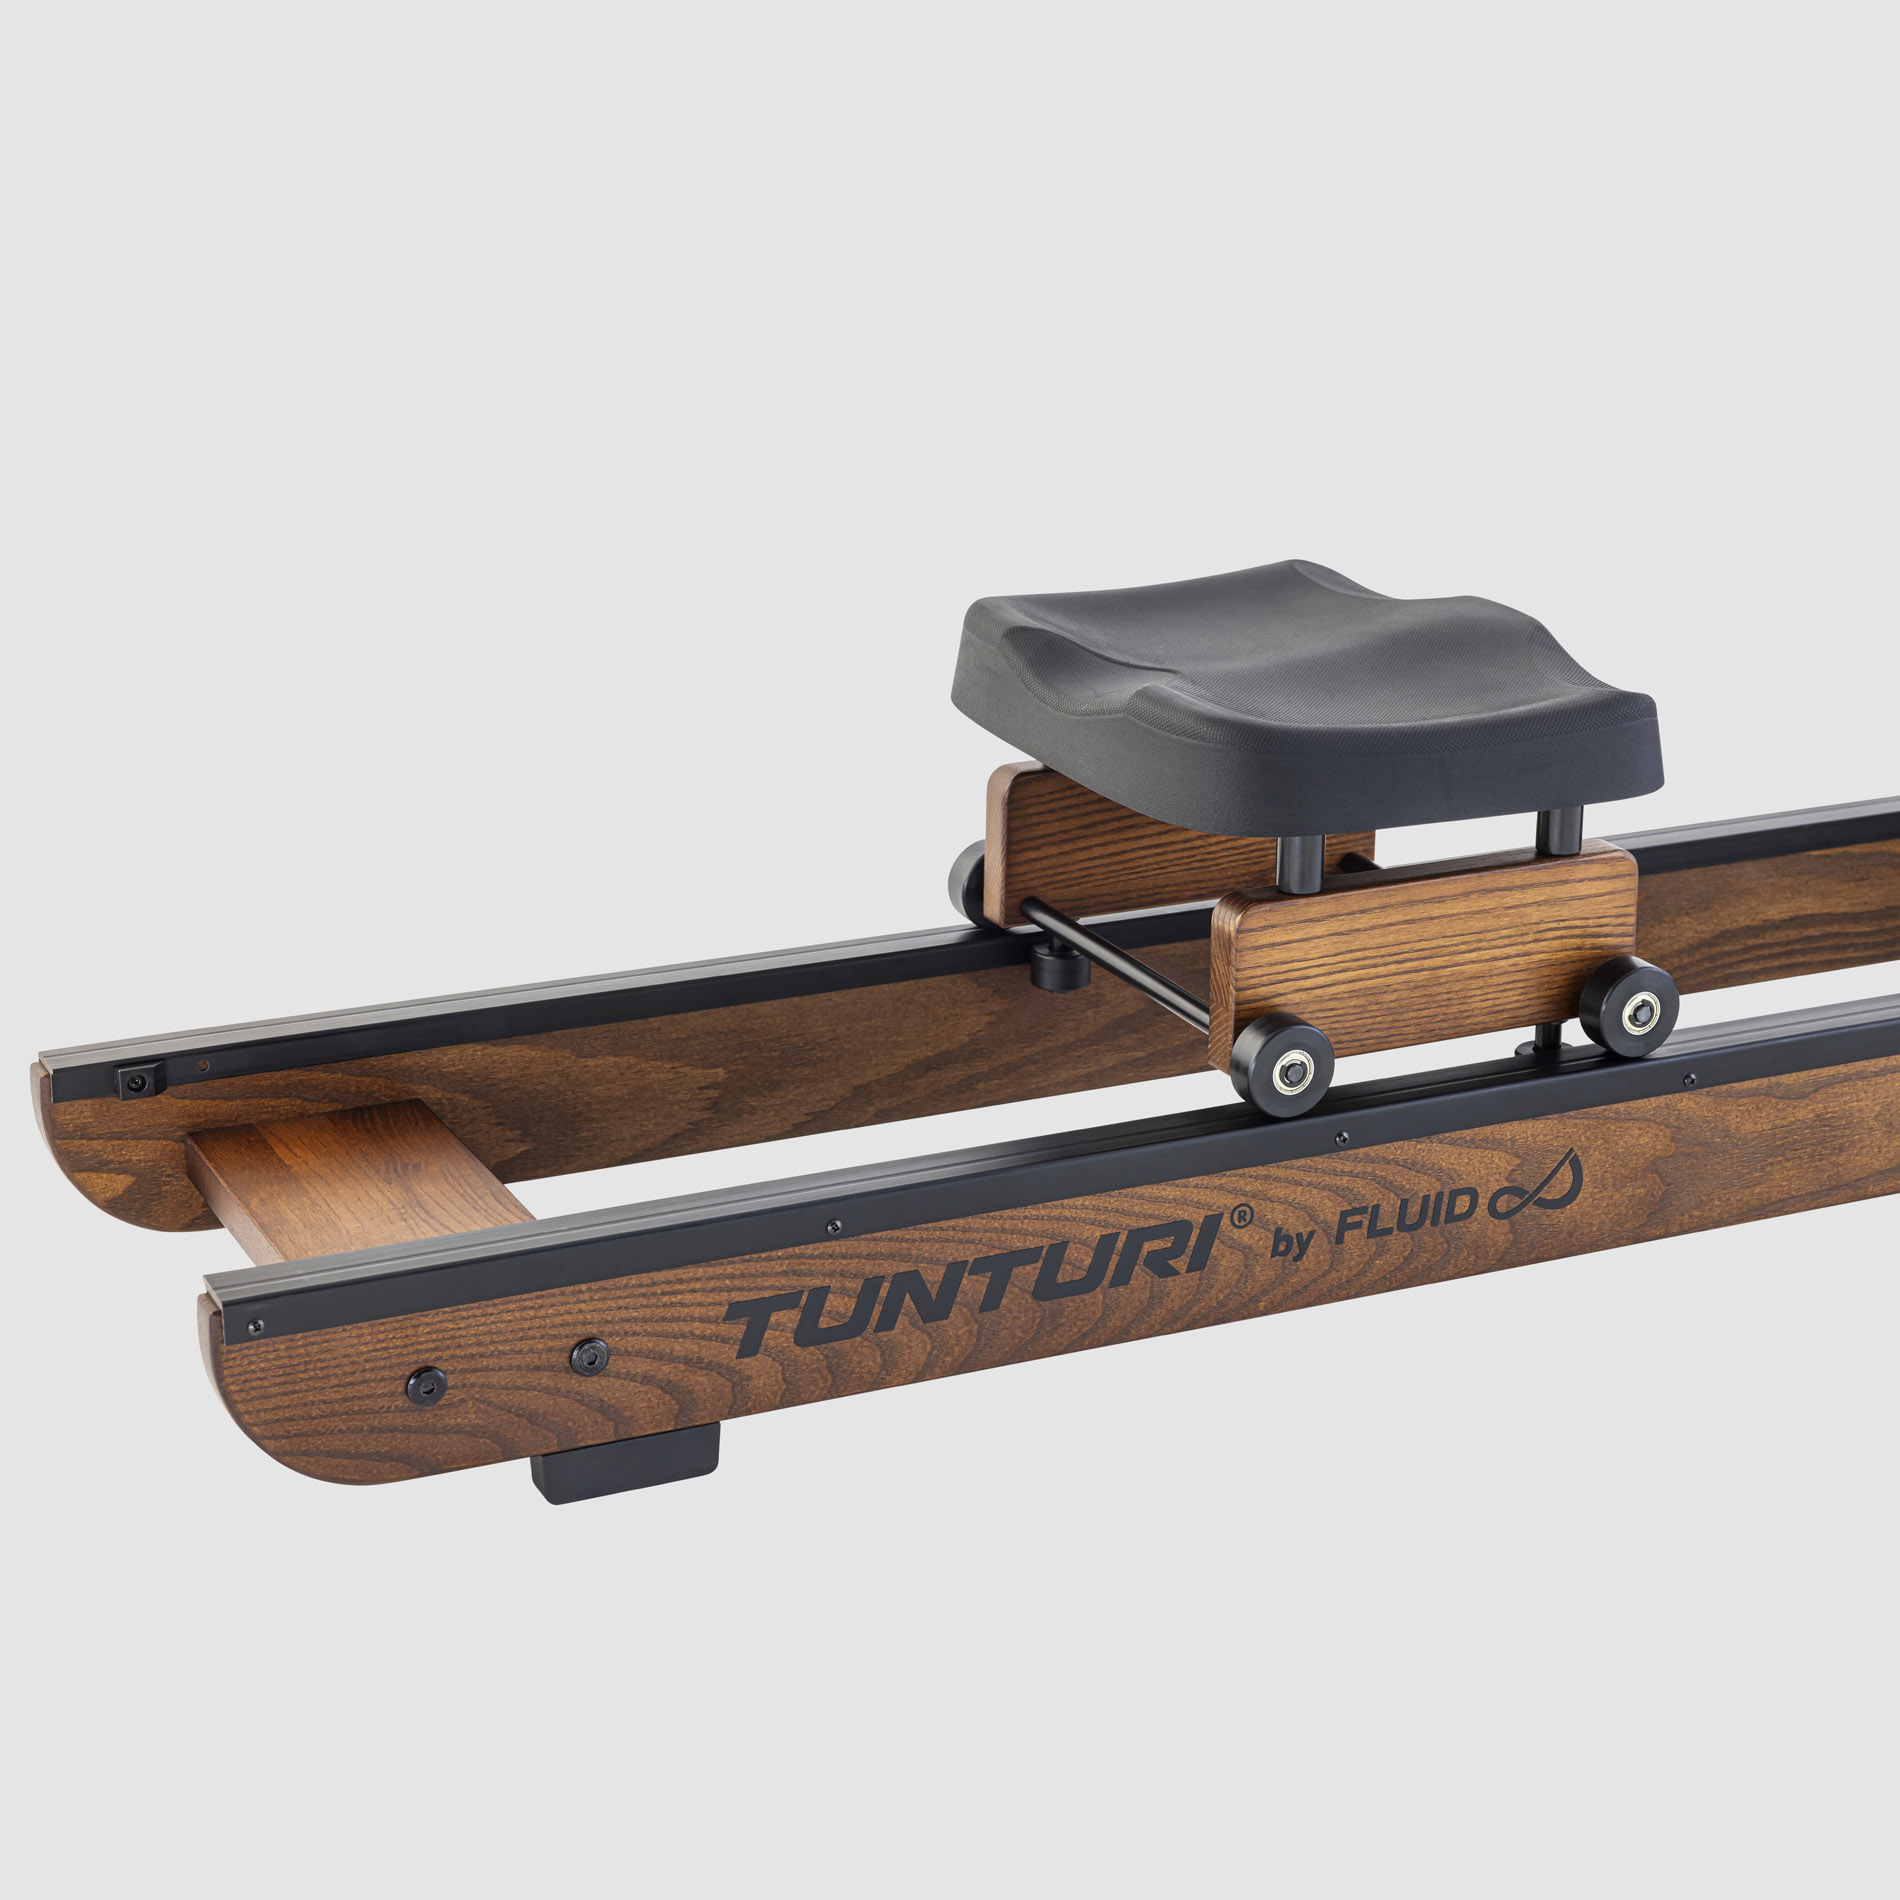 Ultimate comfort, stability and balance while rowing
